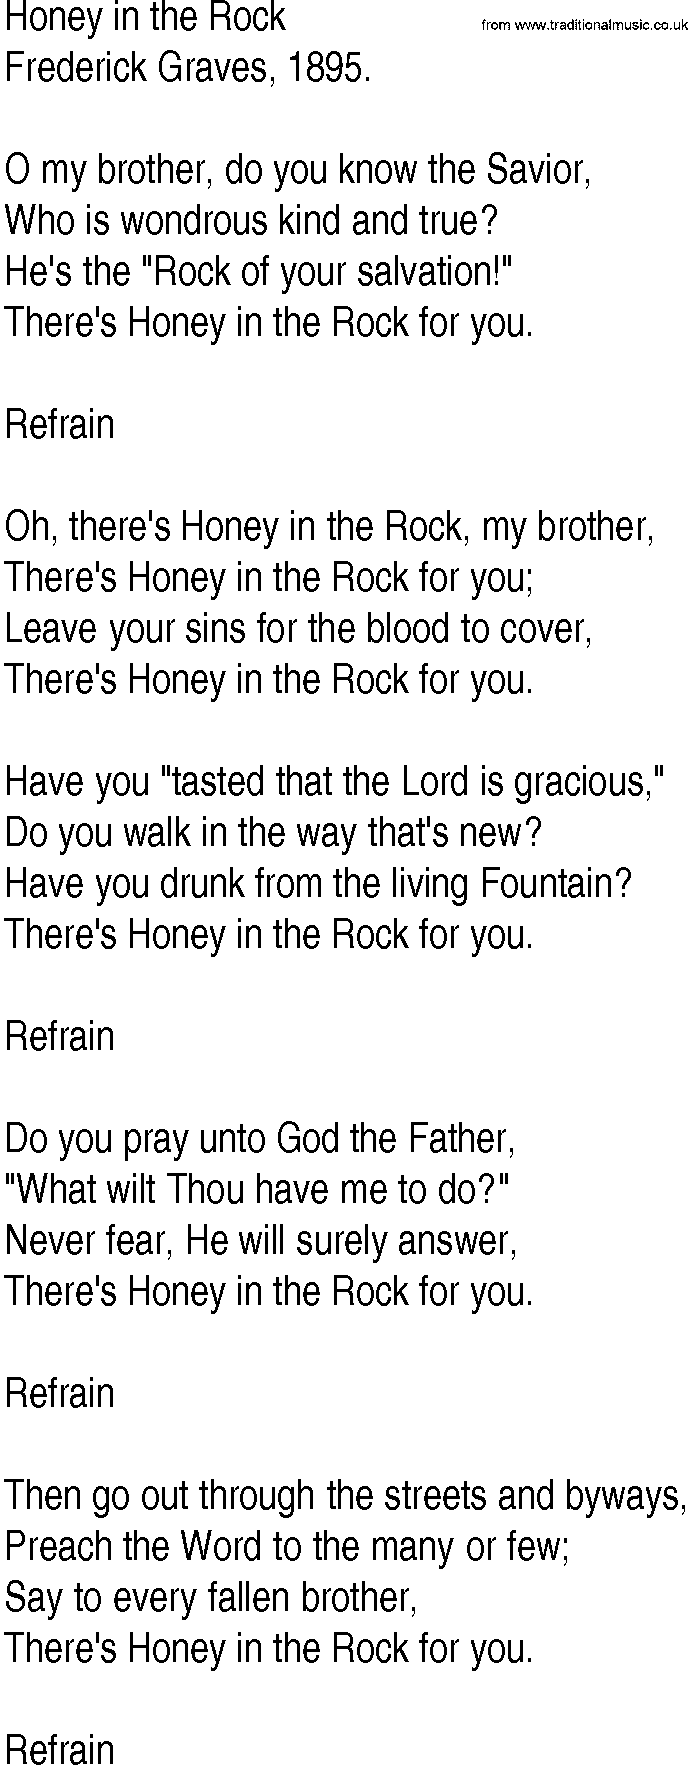 Hymn and Gospel Song: Honey in the Rock by Frederick Graves lyrics